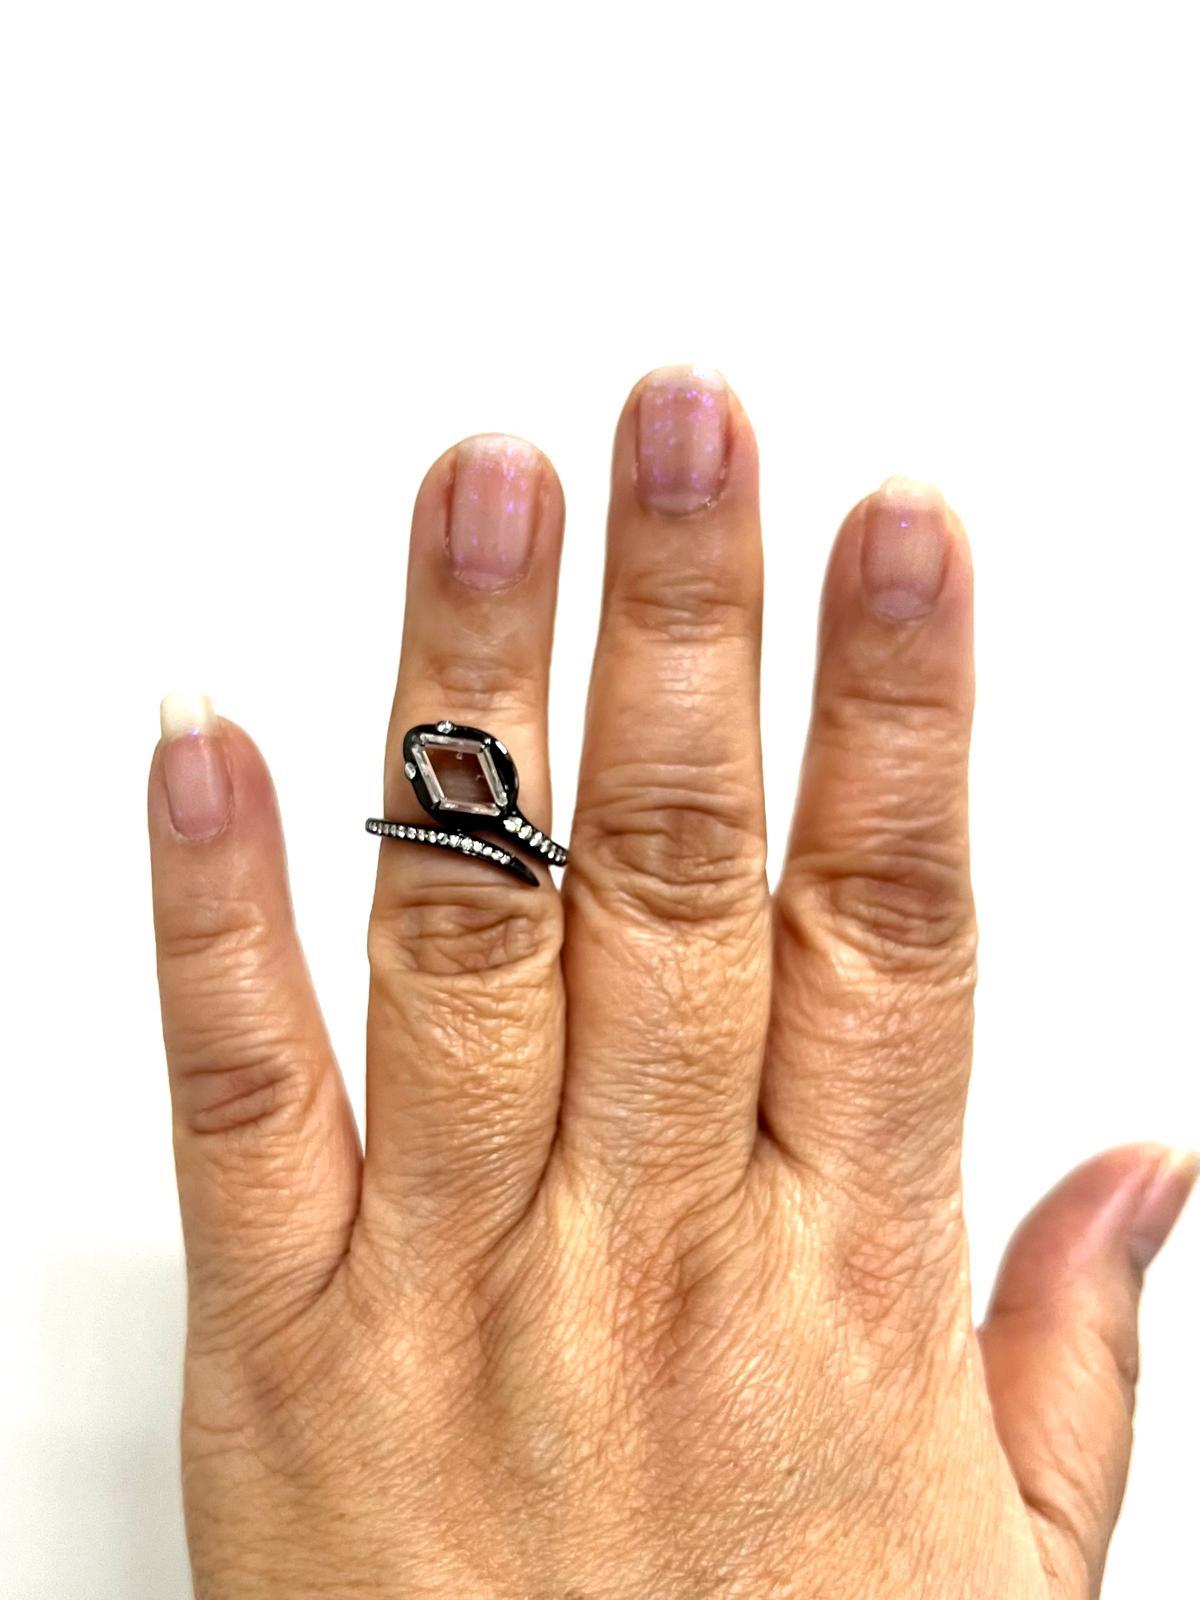 Beautiful 1.27 ct. white diamond kite shape with accent white diamond rounds.  Handmade in 18k white gold and black rhodium.  Ring size 6.75.  A great serpent style ring that is trendy yet classy.